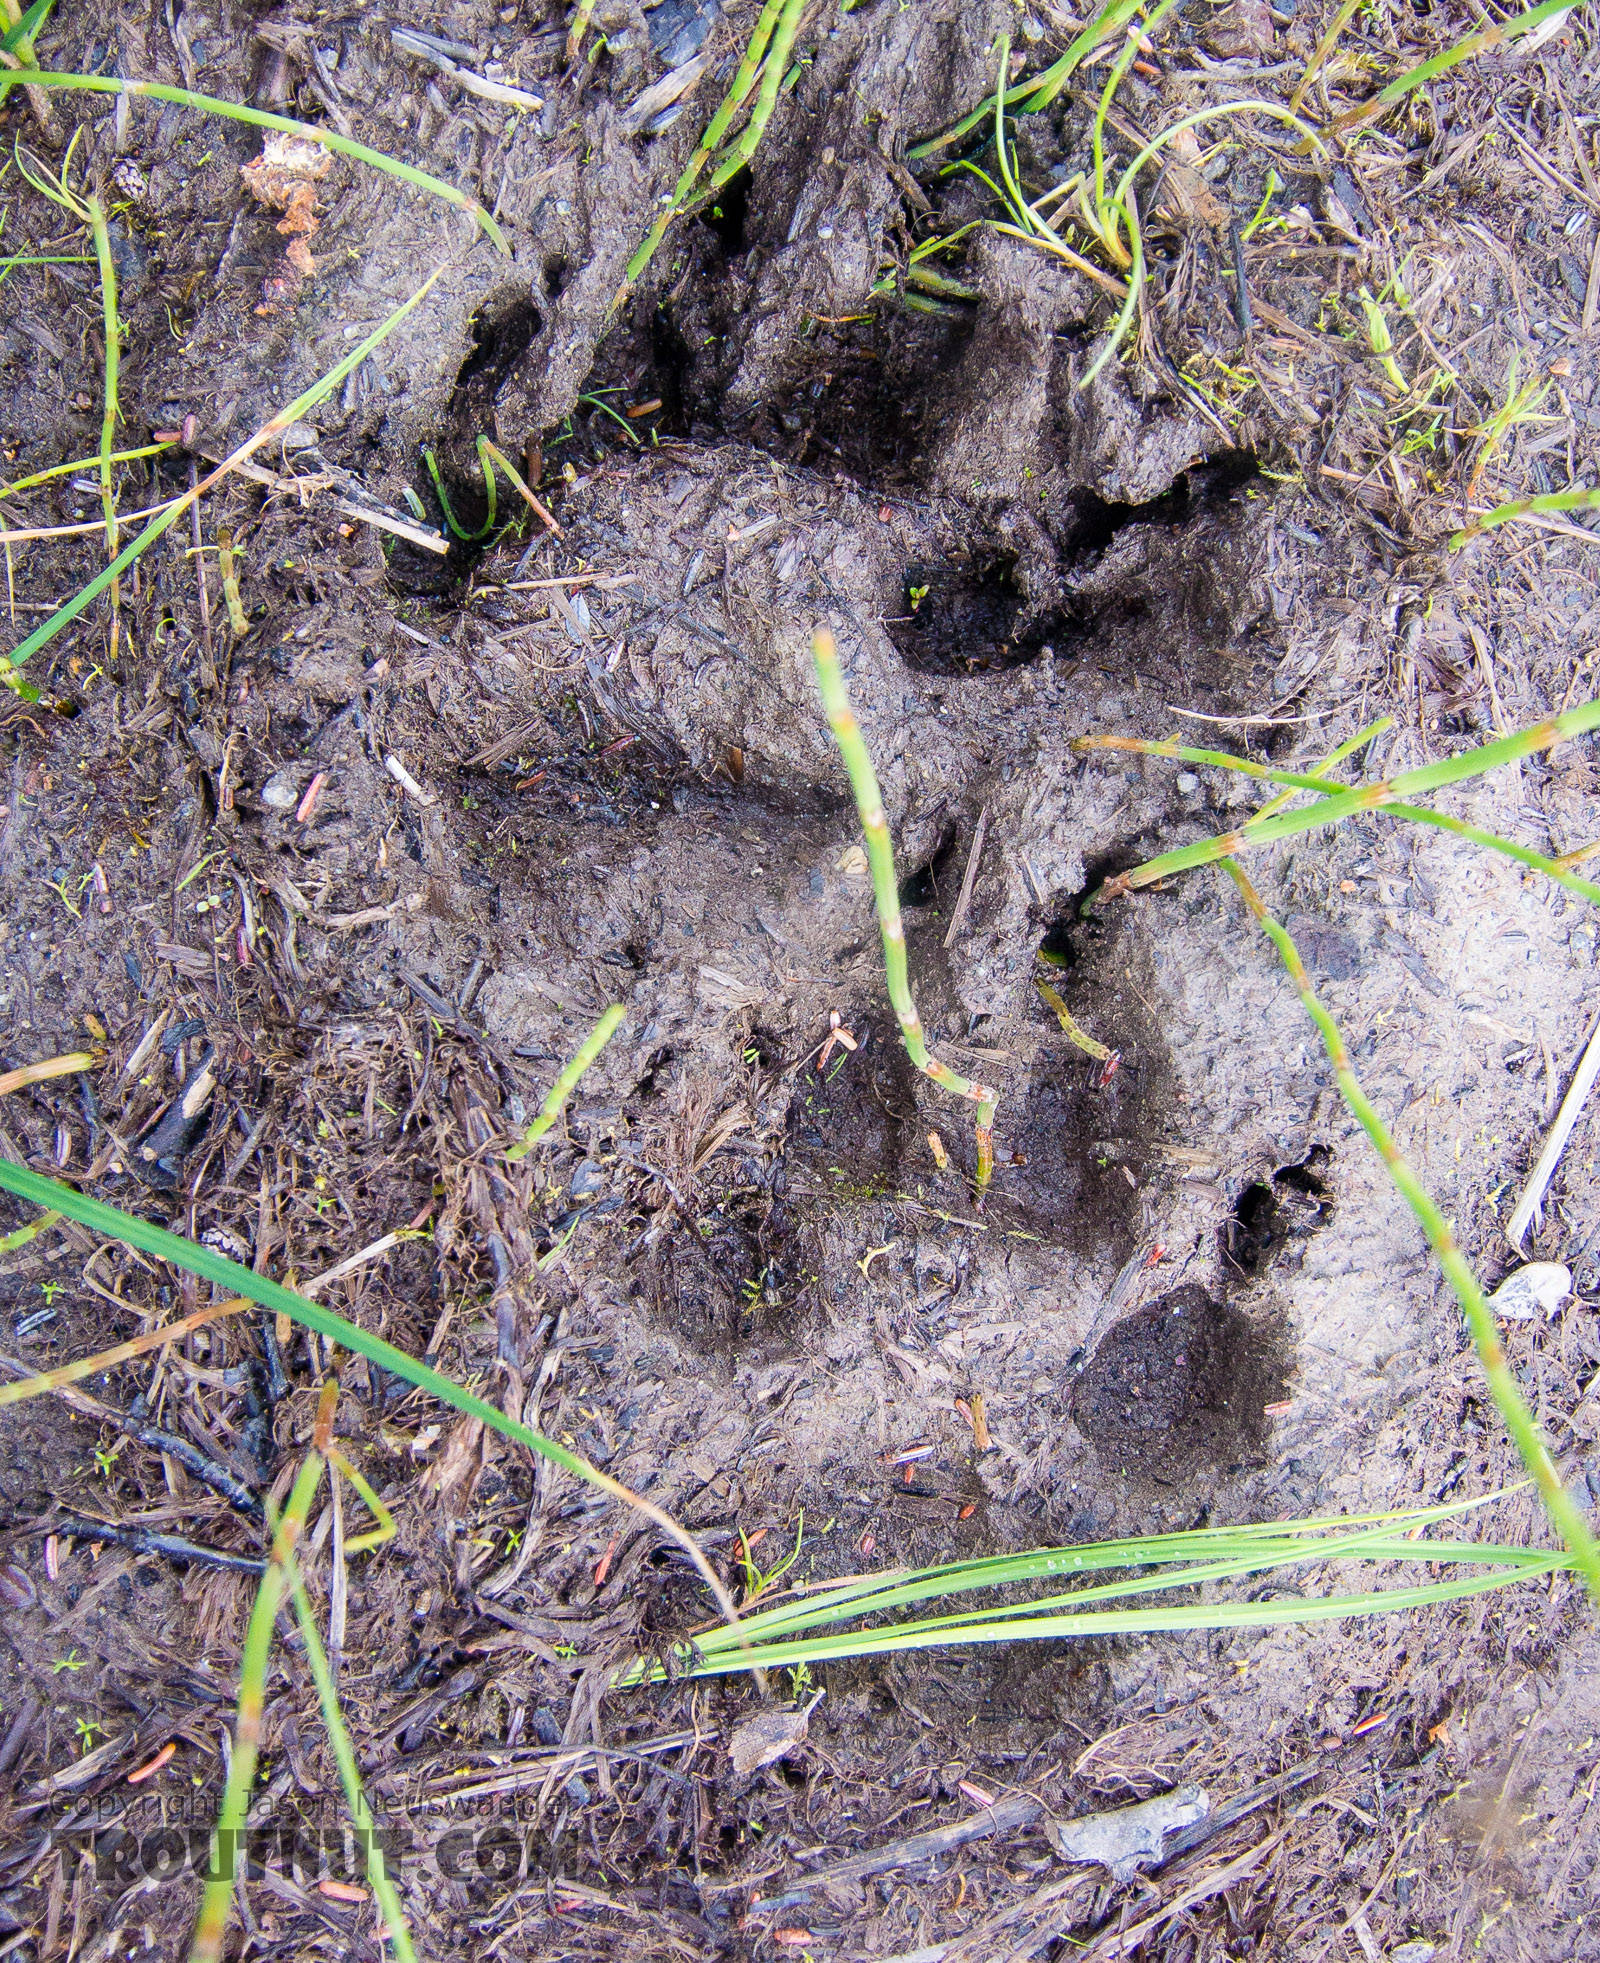 Wolf tracks we found on the trial during the slog out From the Gulkana River in Alaska.